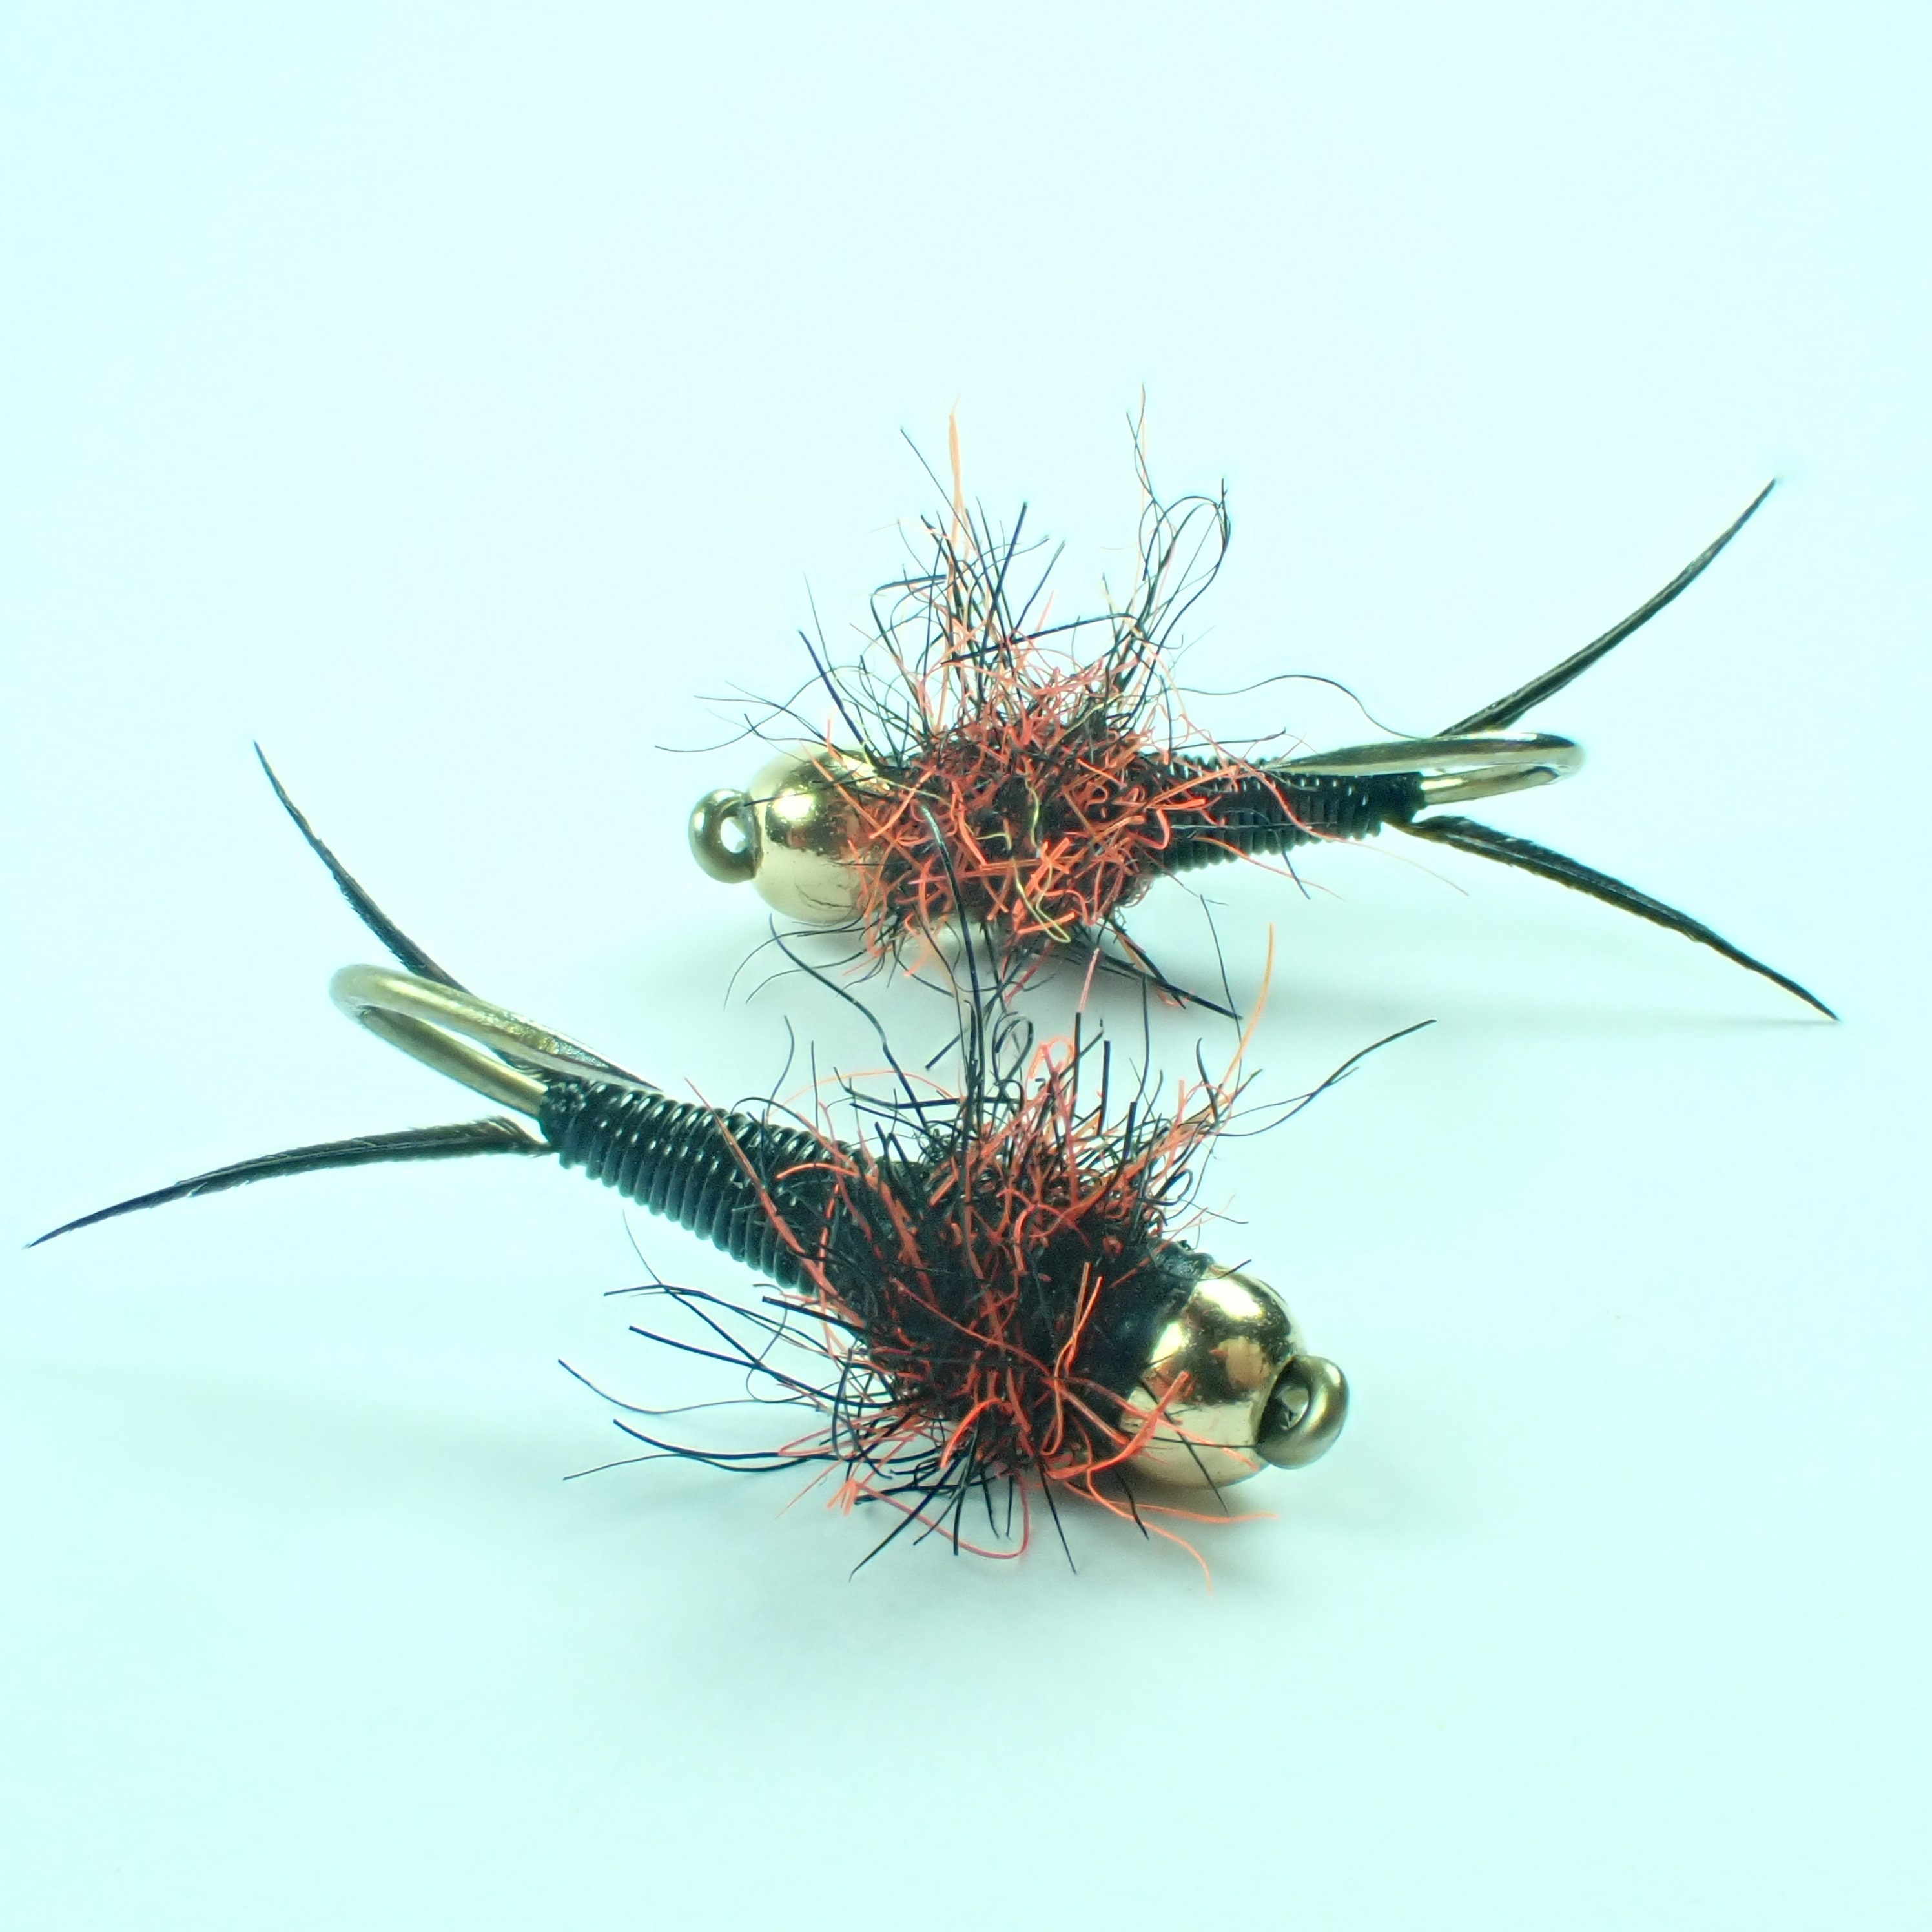 Copper John Black Barbed Fishing Fly. Weighted Classic Fly